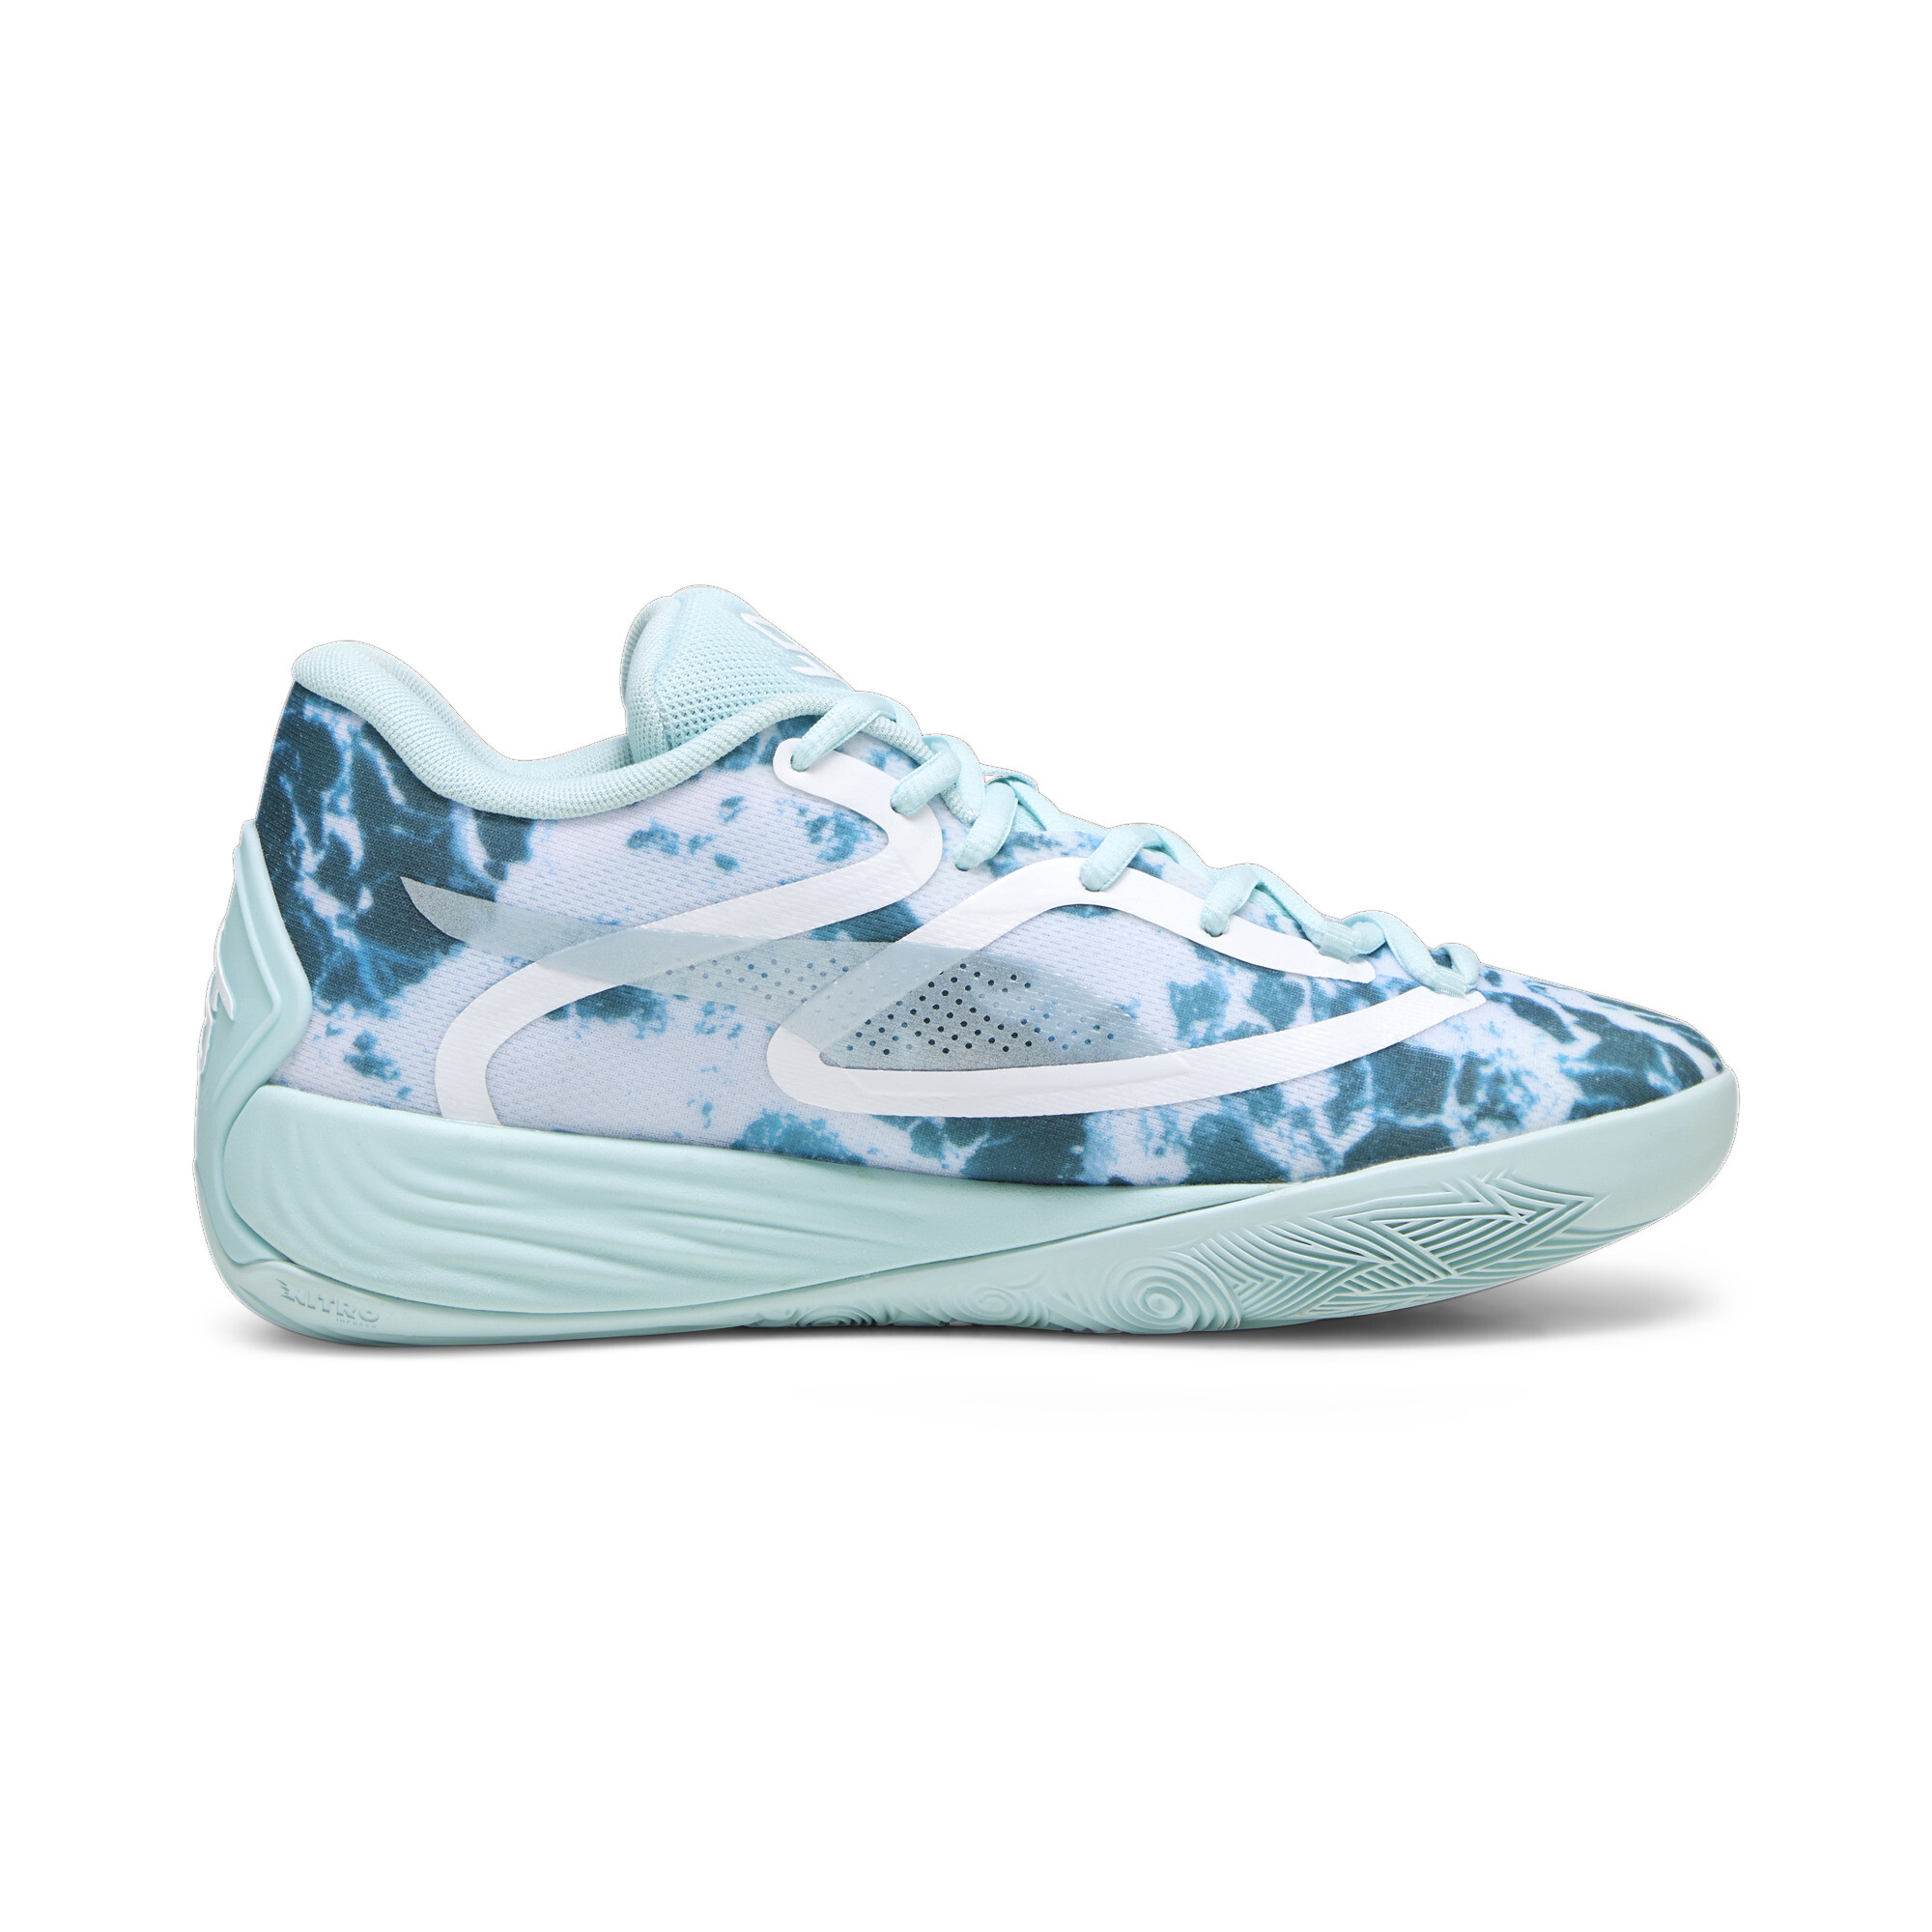 Women's Puma Stewie 2 Water's Basketball Shoes, Blue, Size 35.5, Shoes